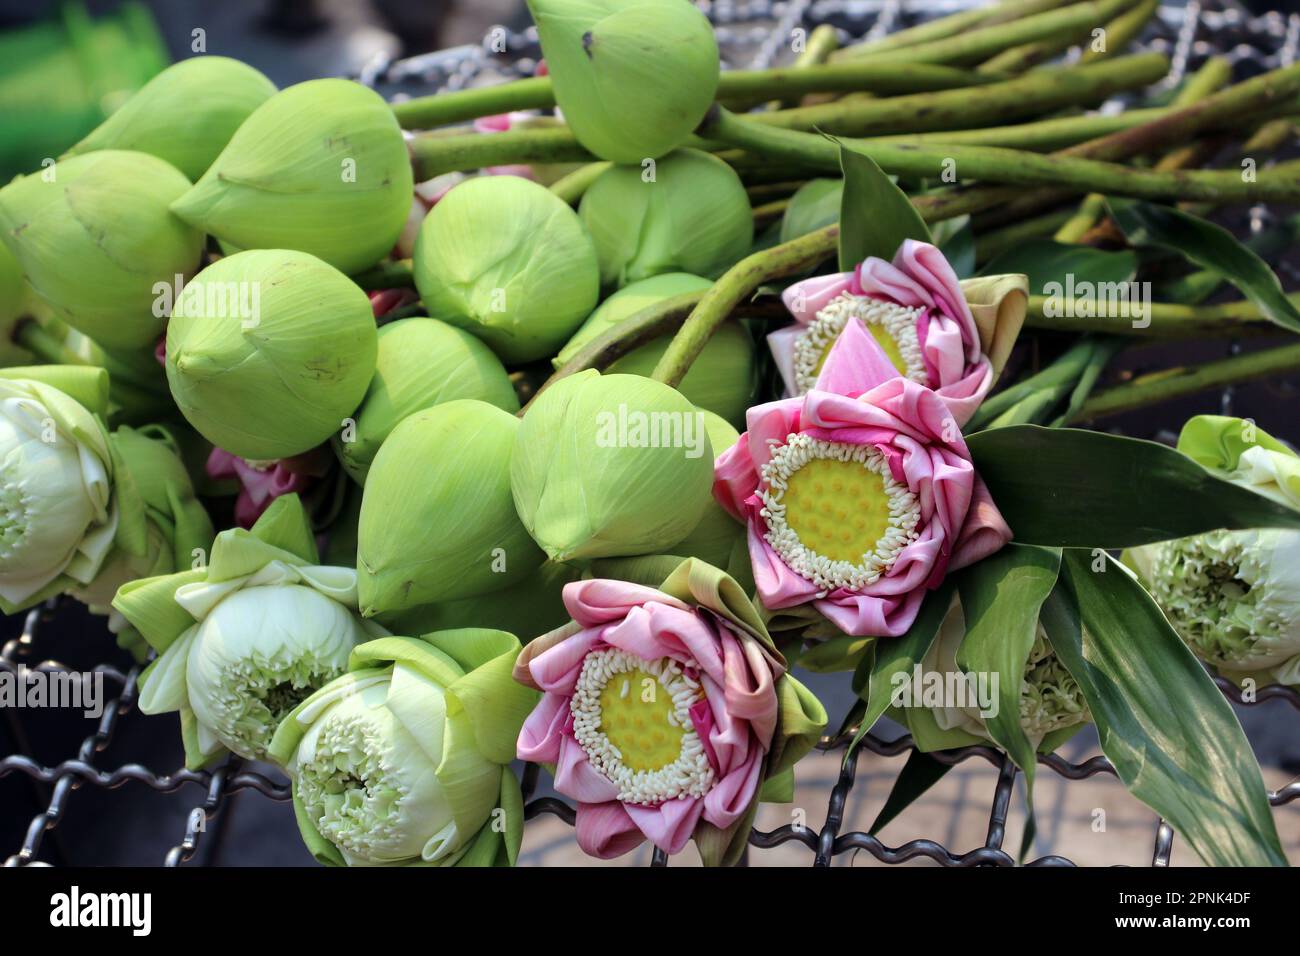 green, pink and white sacred lotus (Nelumbo nucifera) flowers and buds left as offerings made Stock Photo